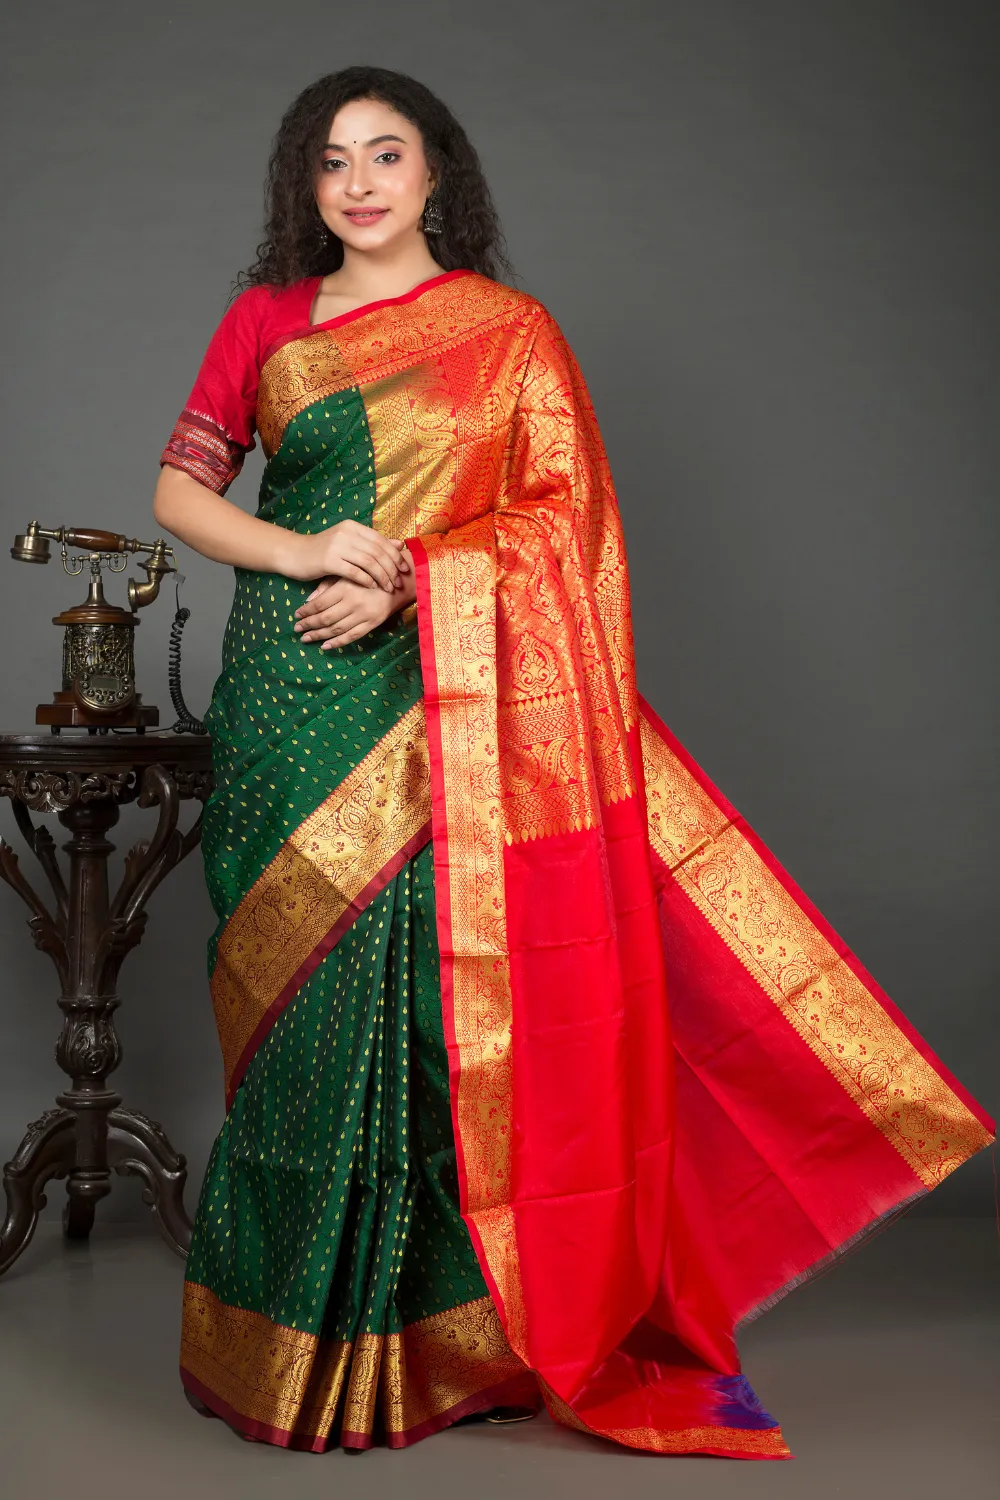 Aggregate 135+ red and green combination saree latest